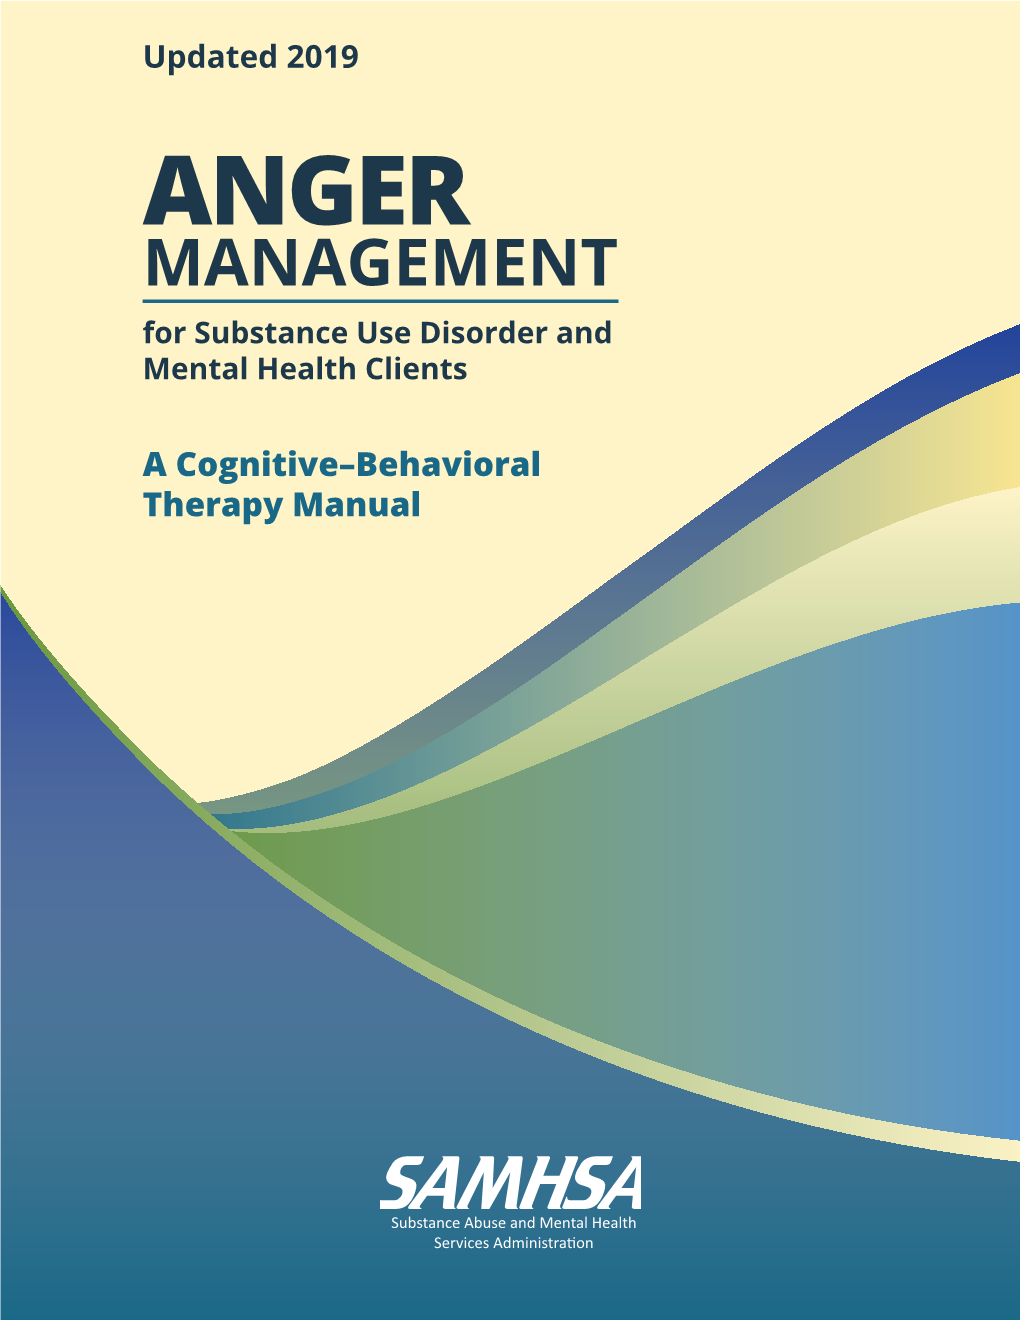 ANGER MANAGEMENT for Substance Use Disorder and Mental Health Clients